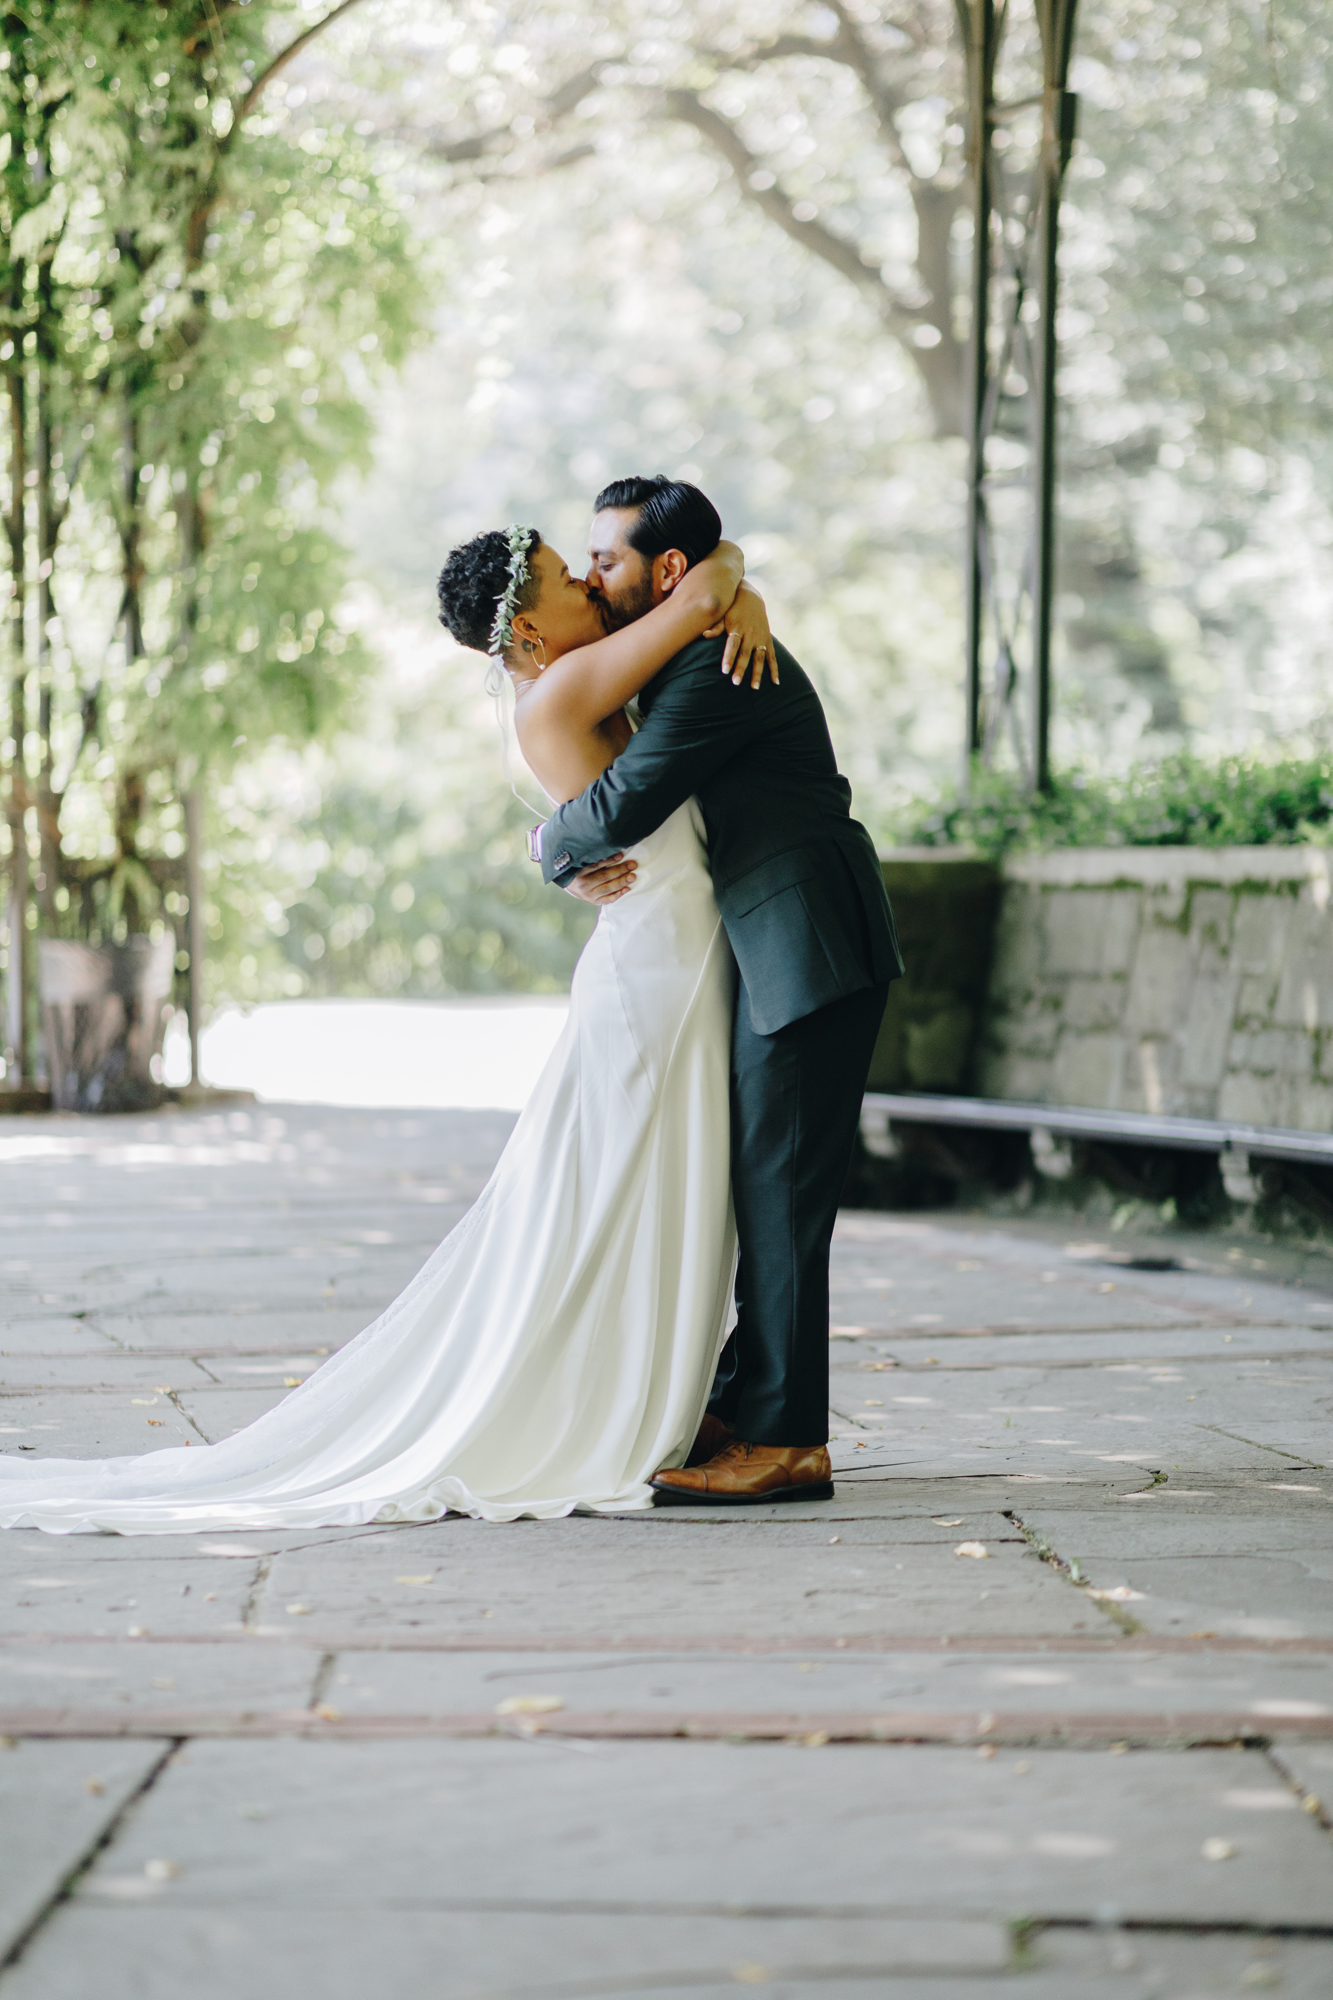 Intimate wedding at the Conservatory Garden